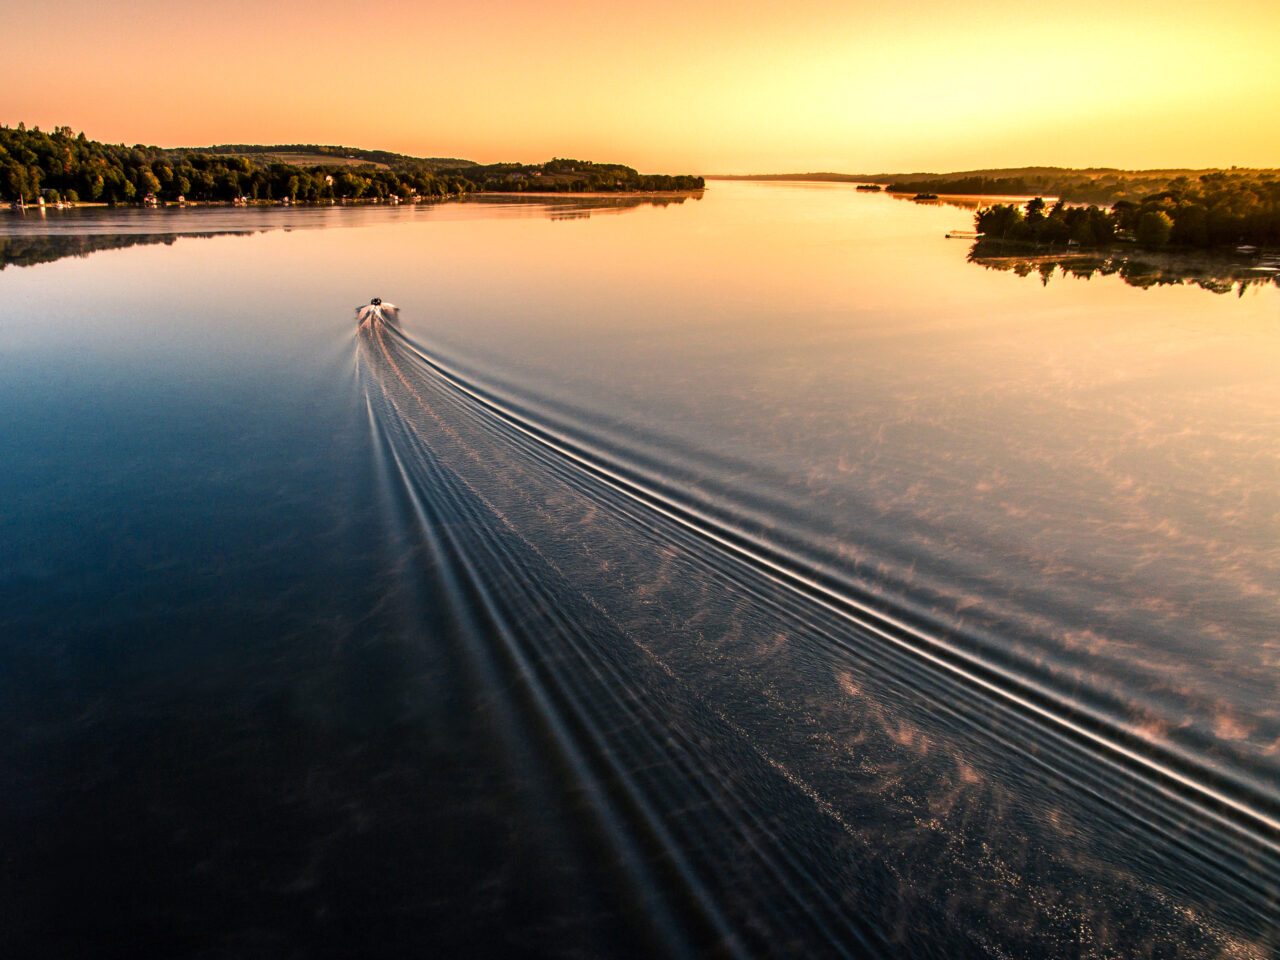 Aerial view looking towards a body of water with ripples from a boat in the distance travelling towards an orange sky with the sun setting